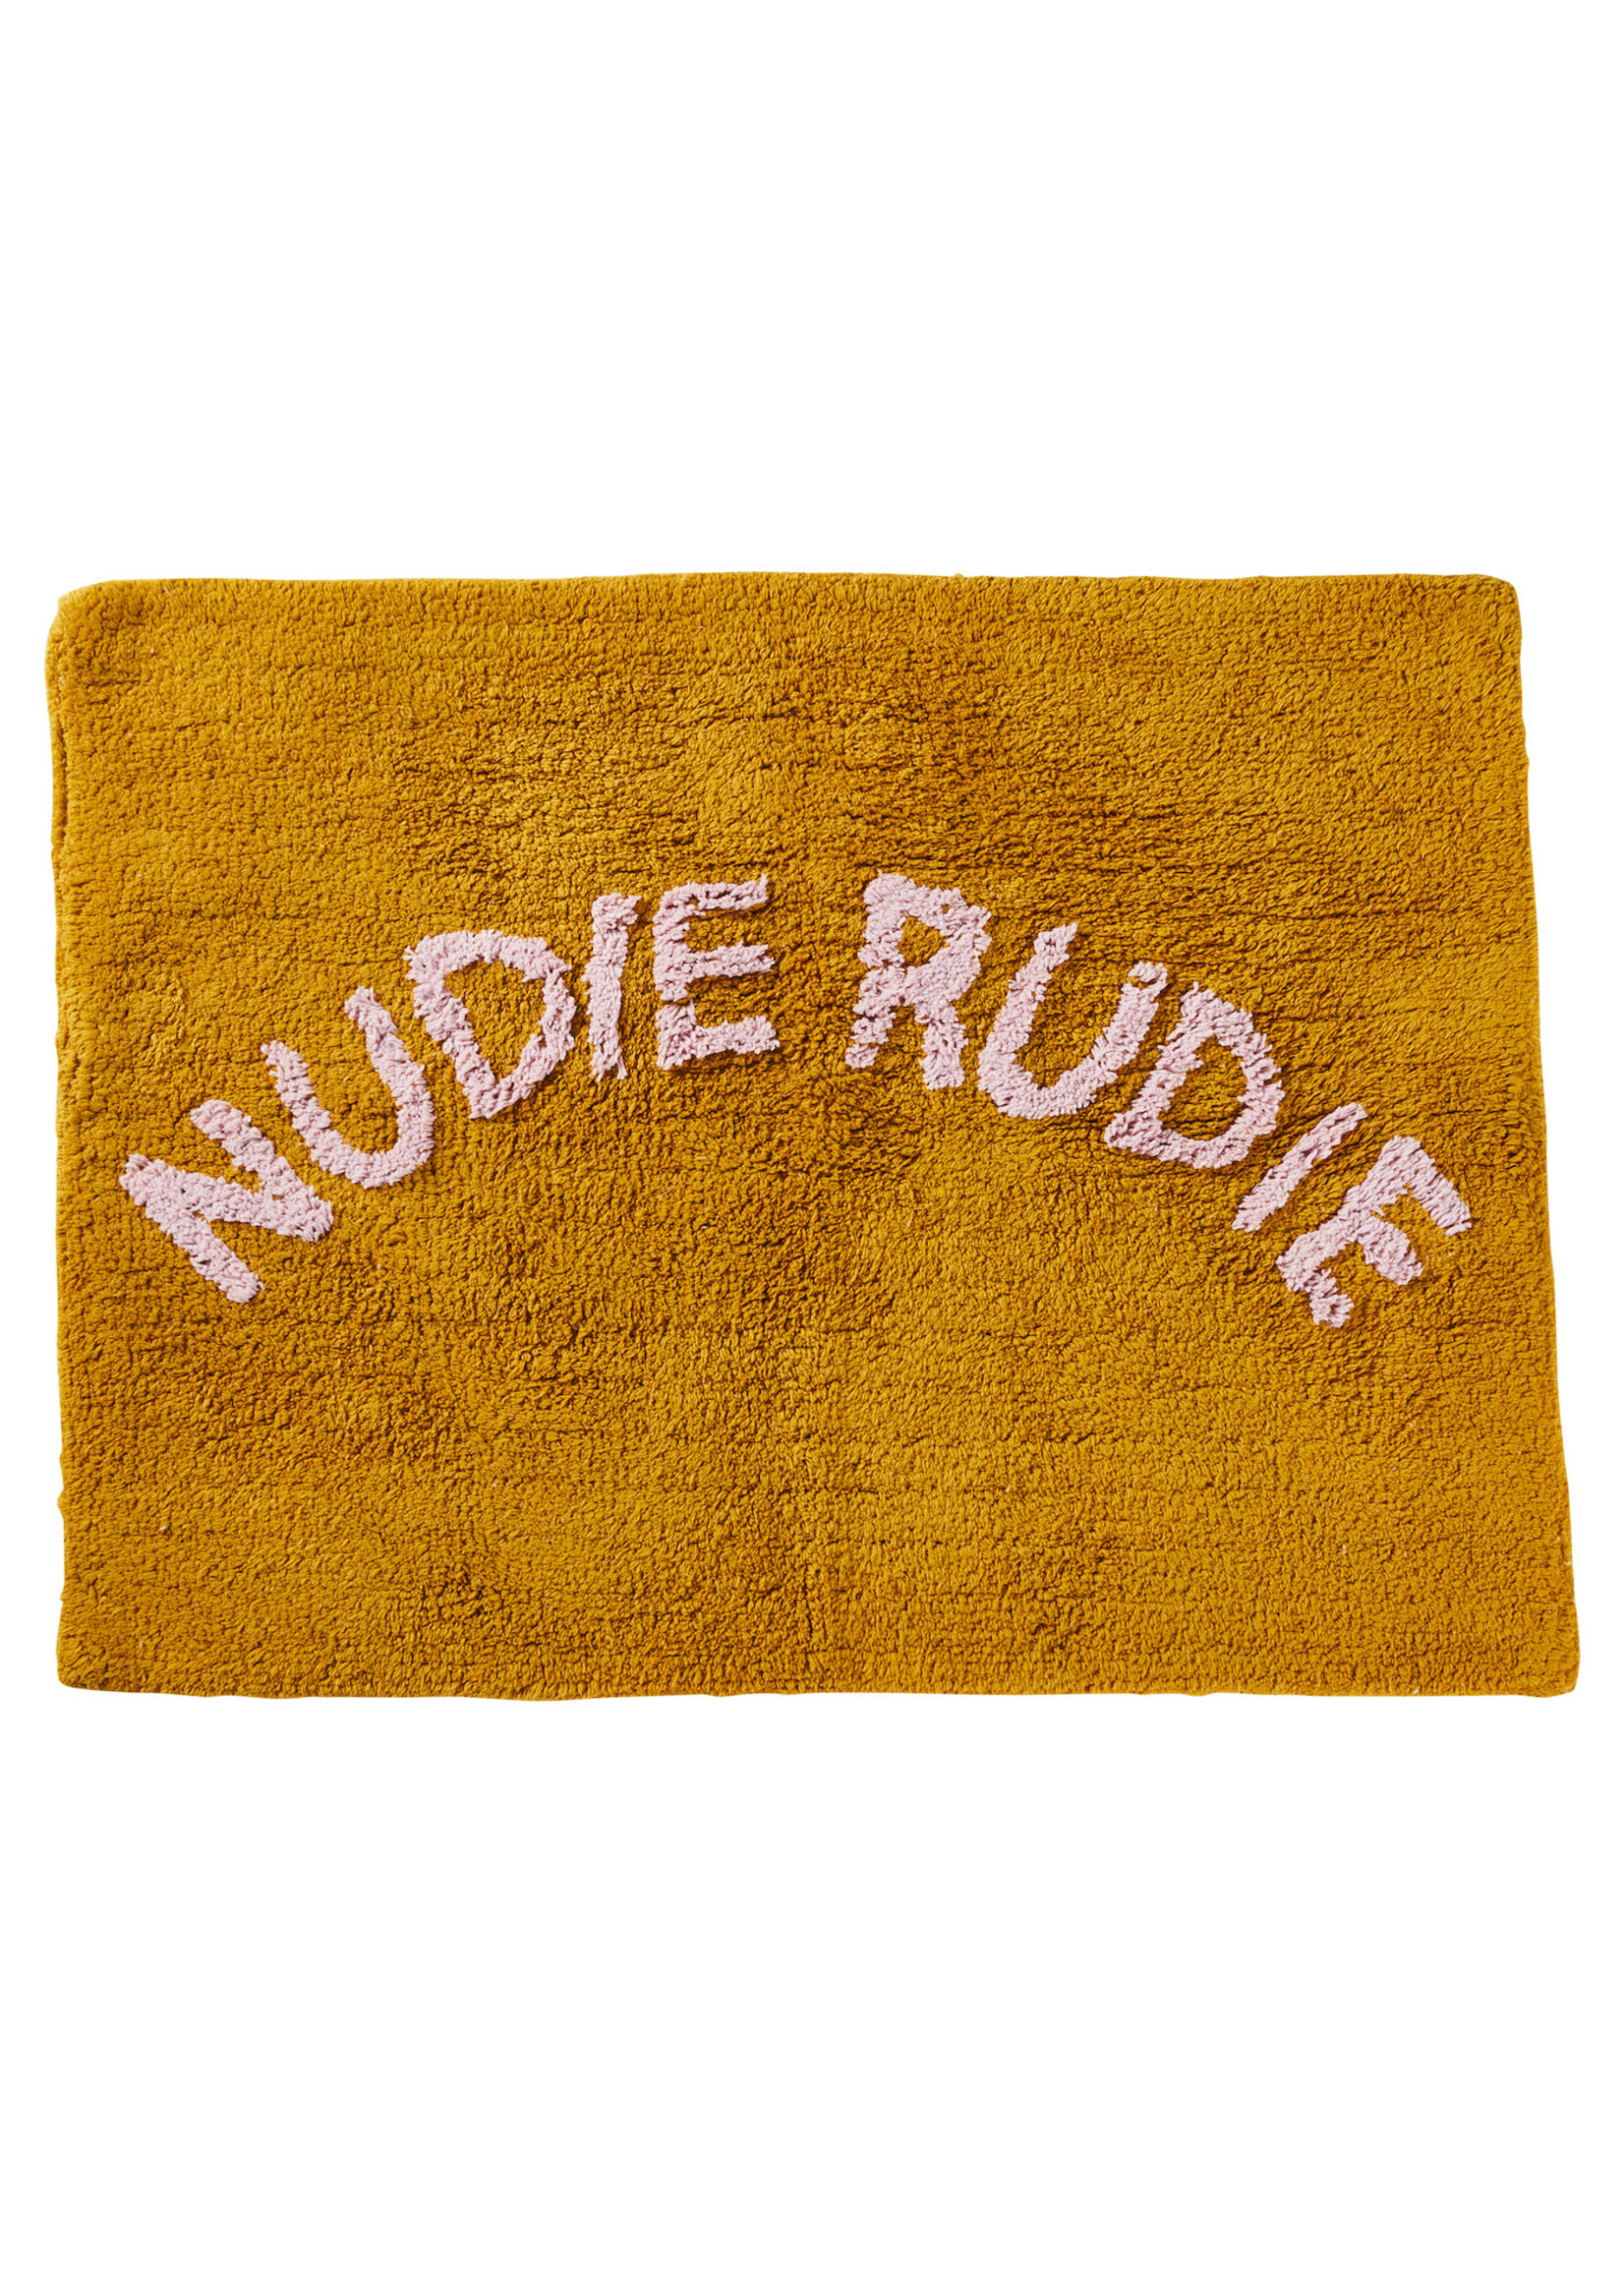 Sage and Clare Tula Nudie Bath Mat - Pear